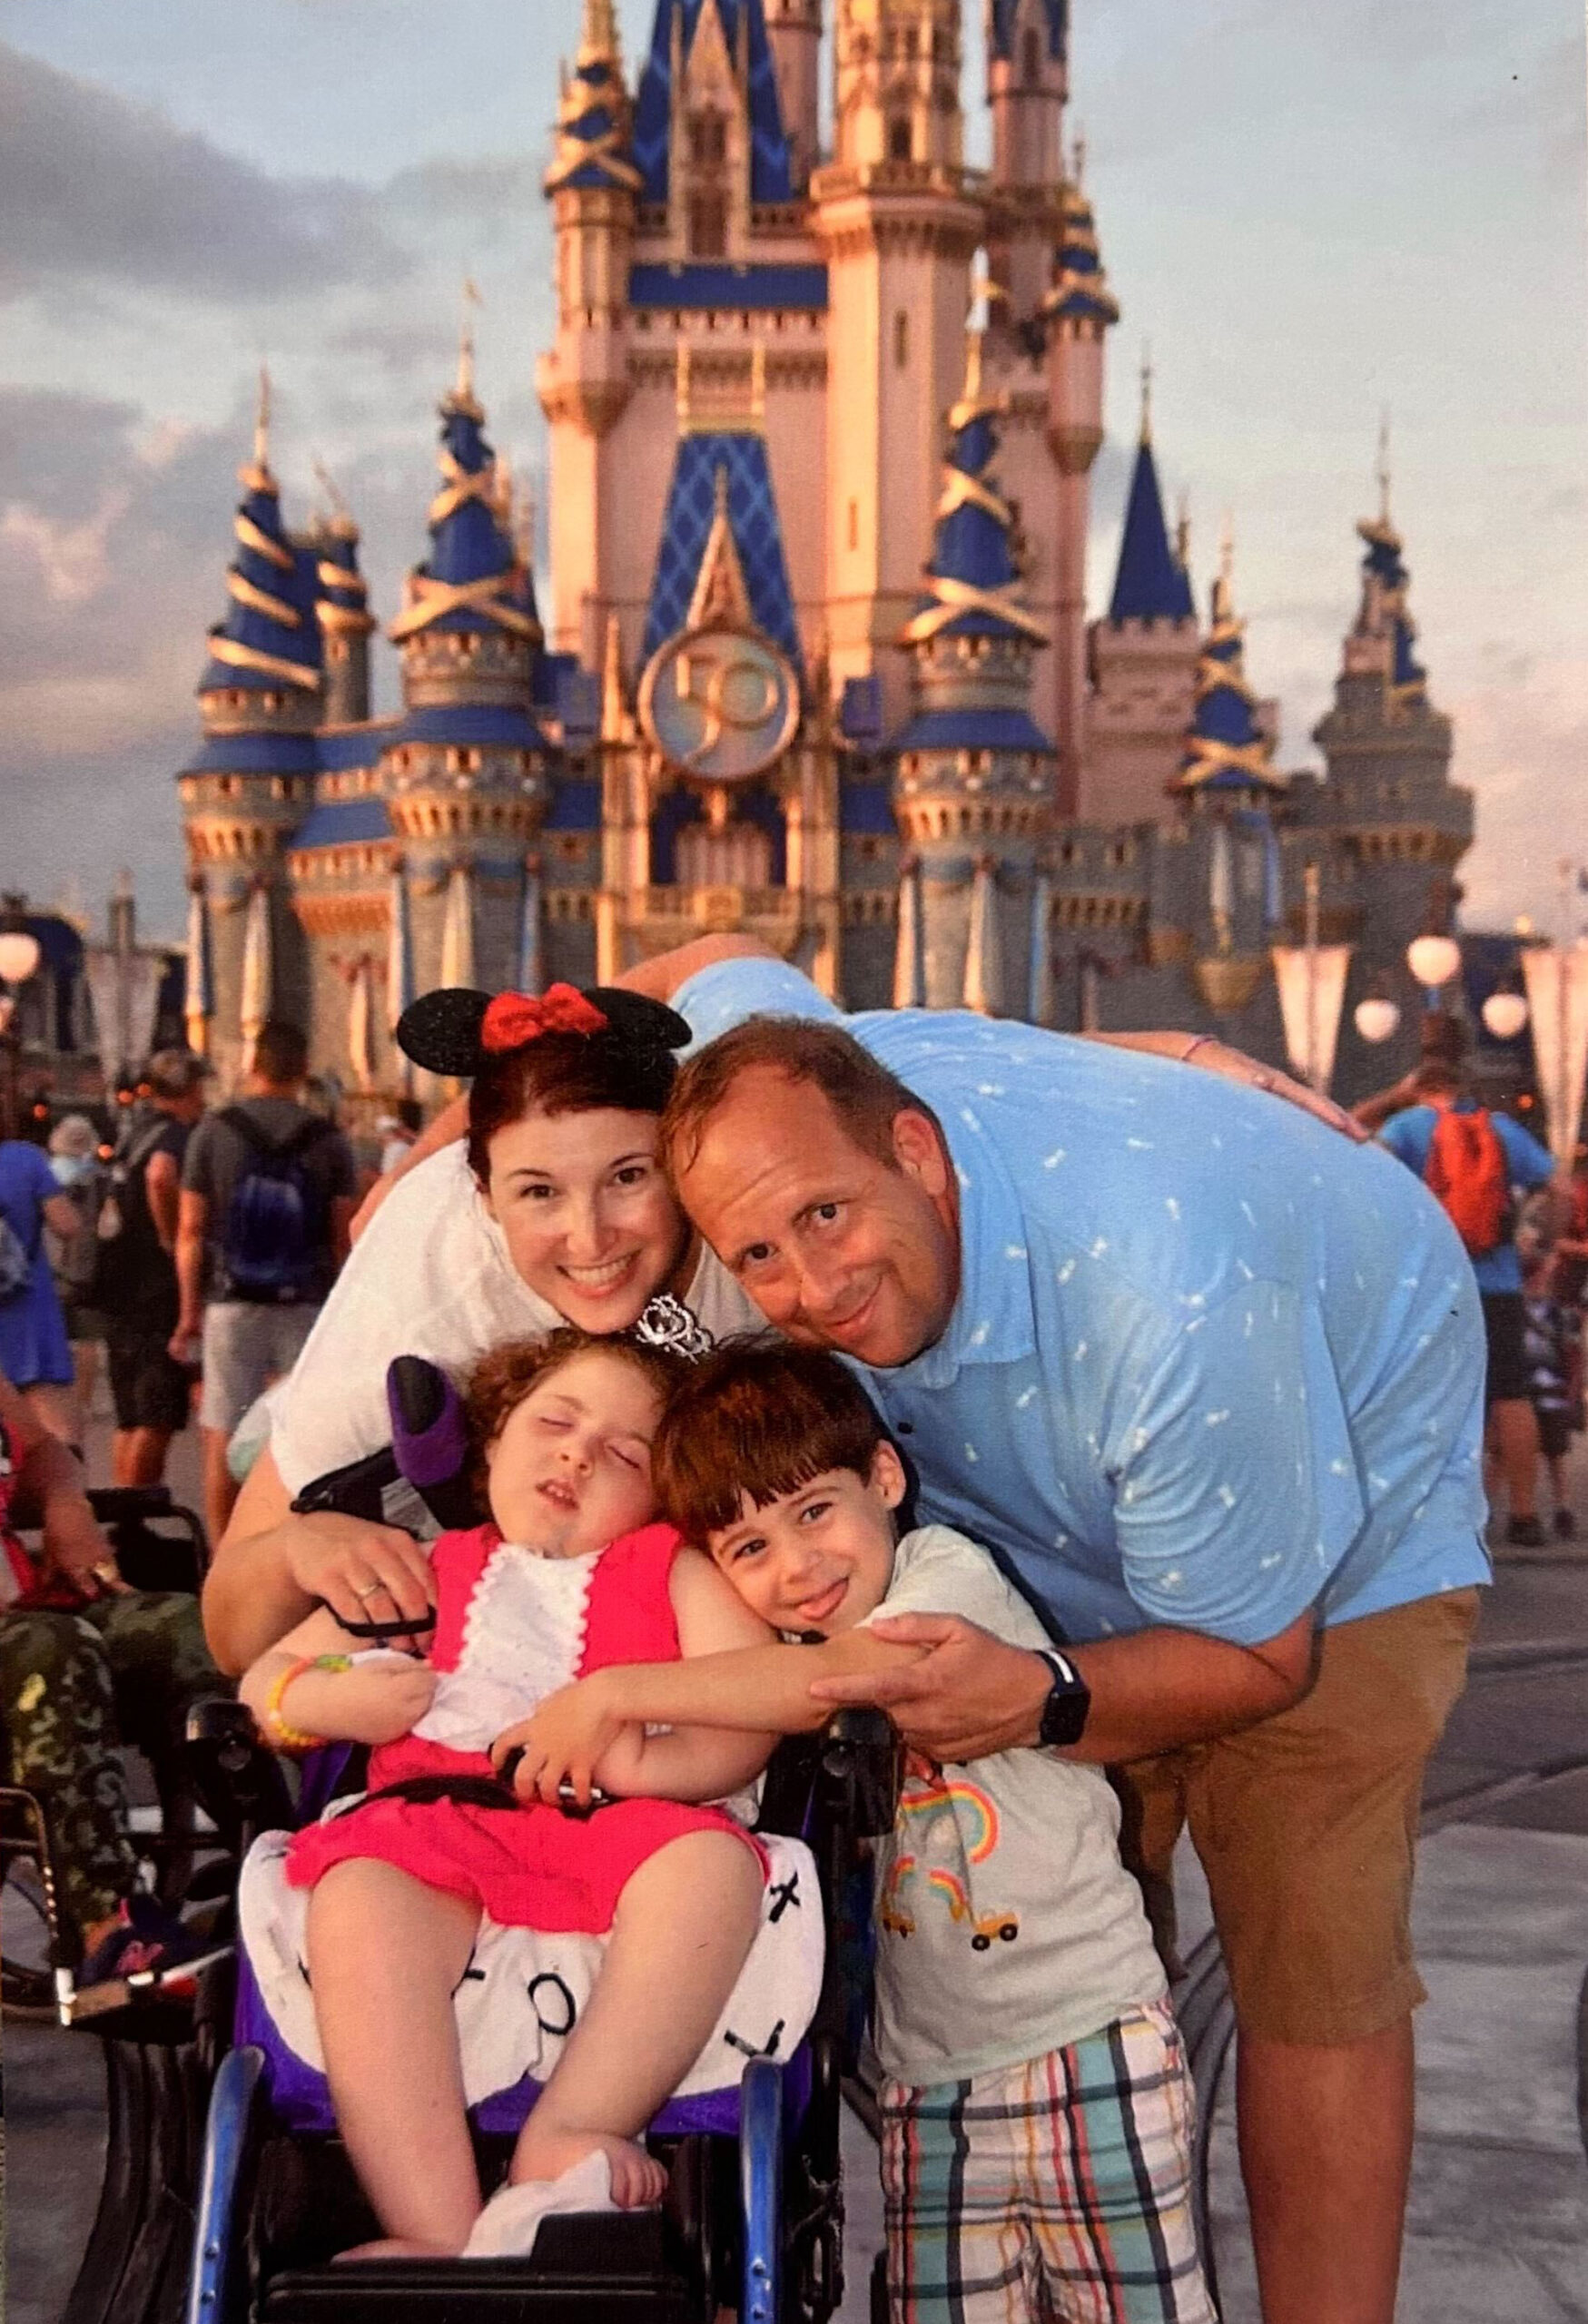 A husband, wife, and their son and daughter pose together for a picture in front of Cinderella Castle at Disney World. The daughter is dressed as a princess.